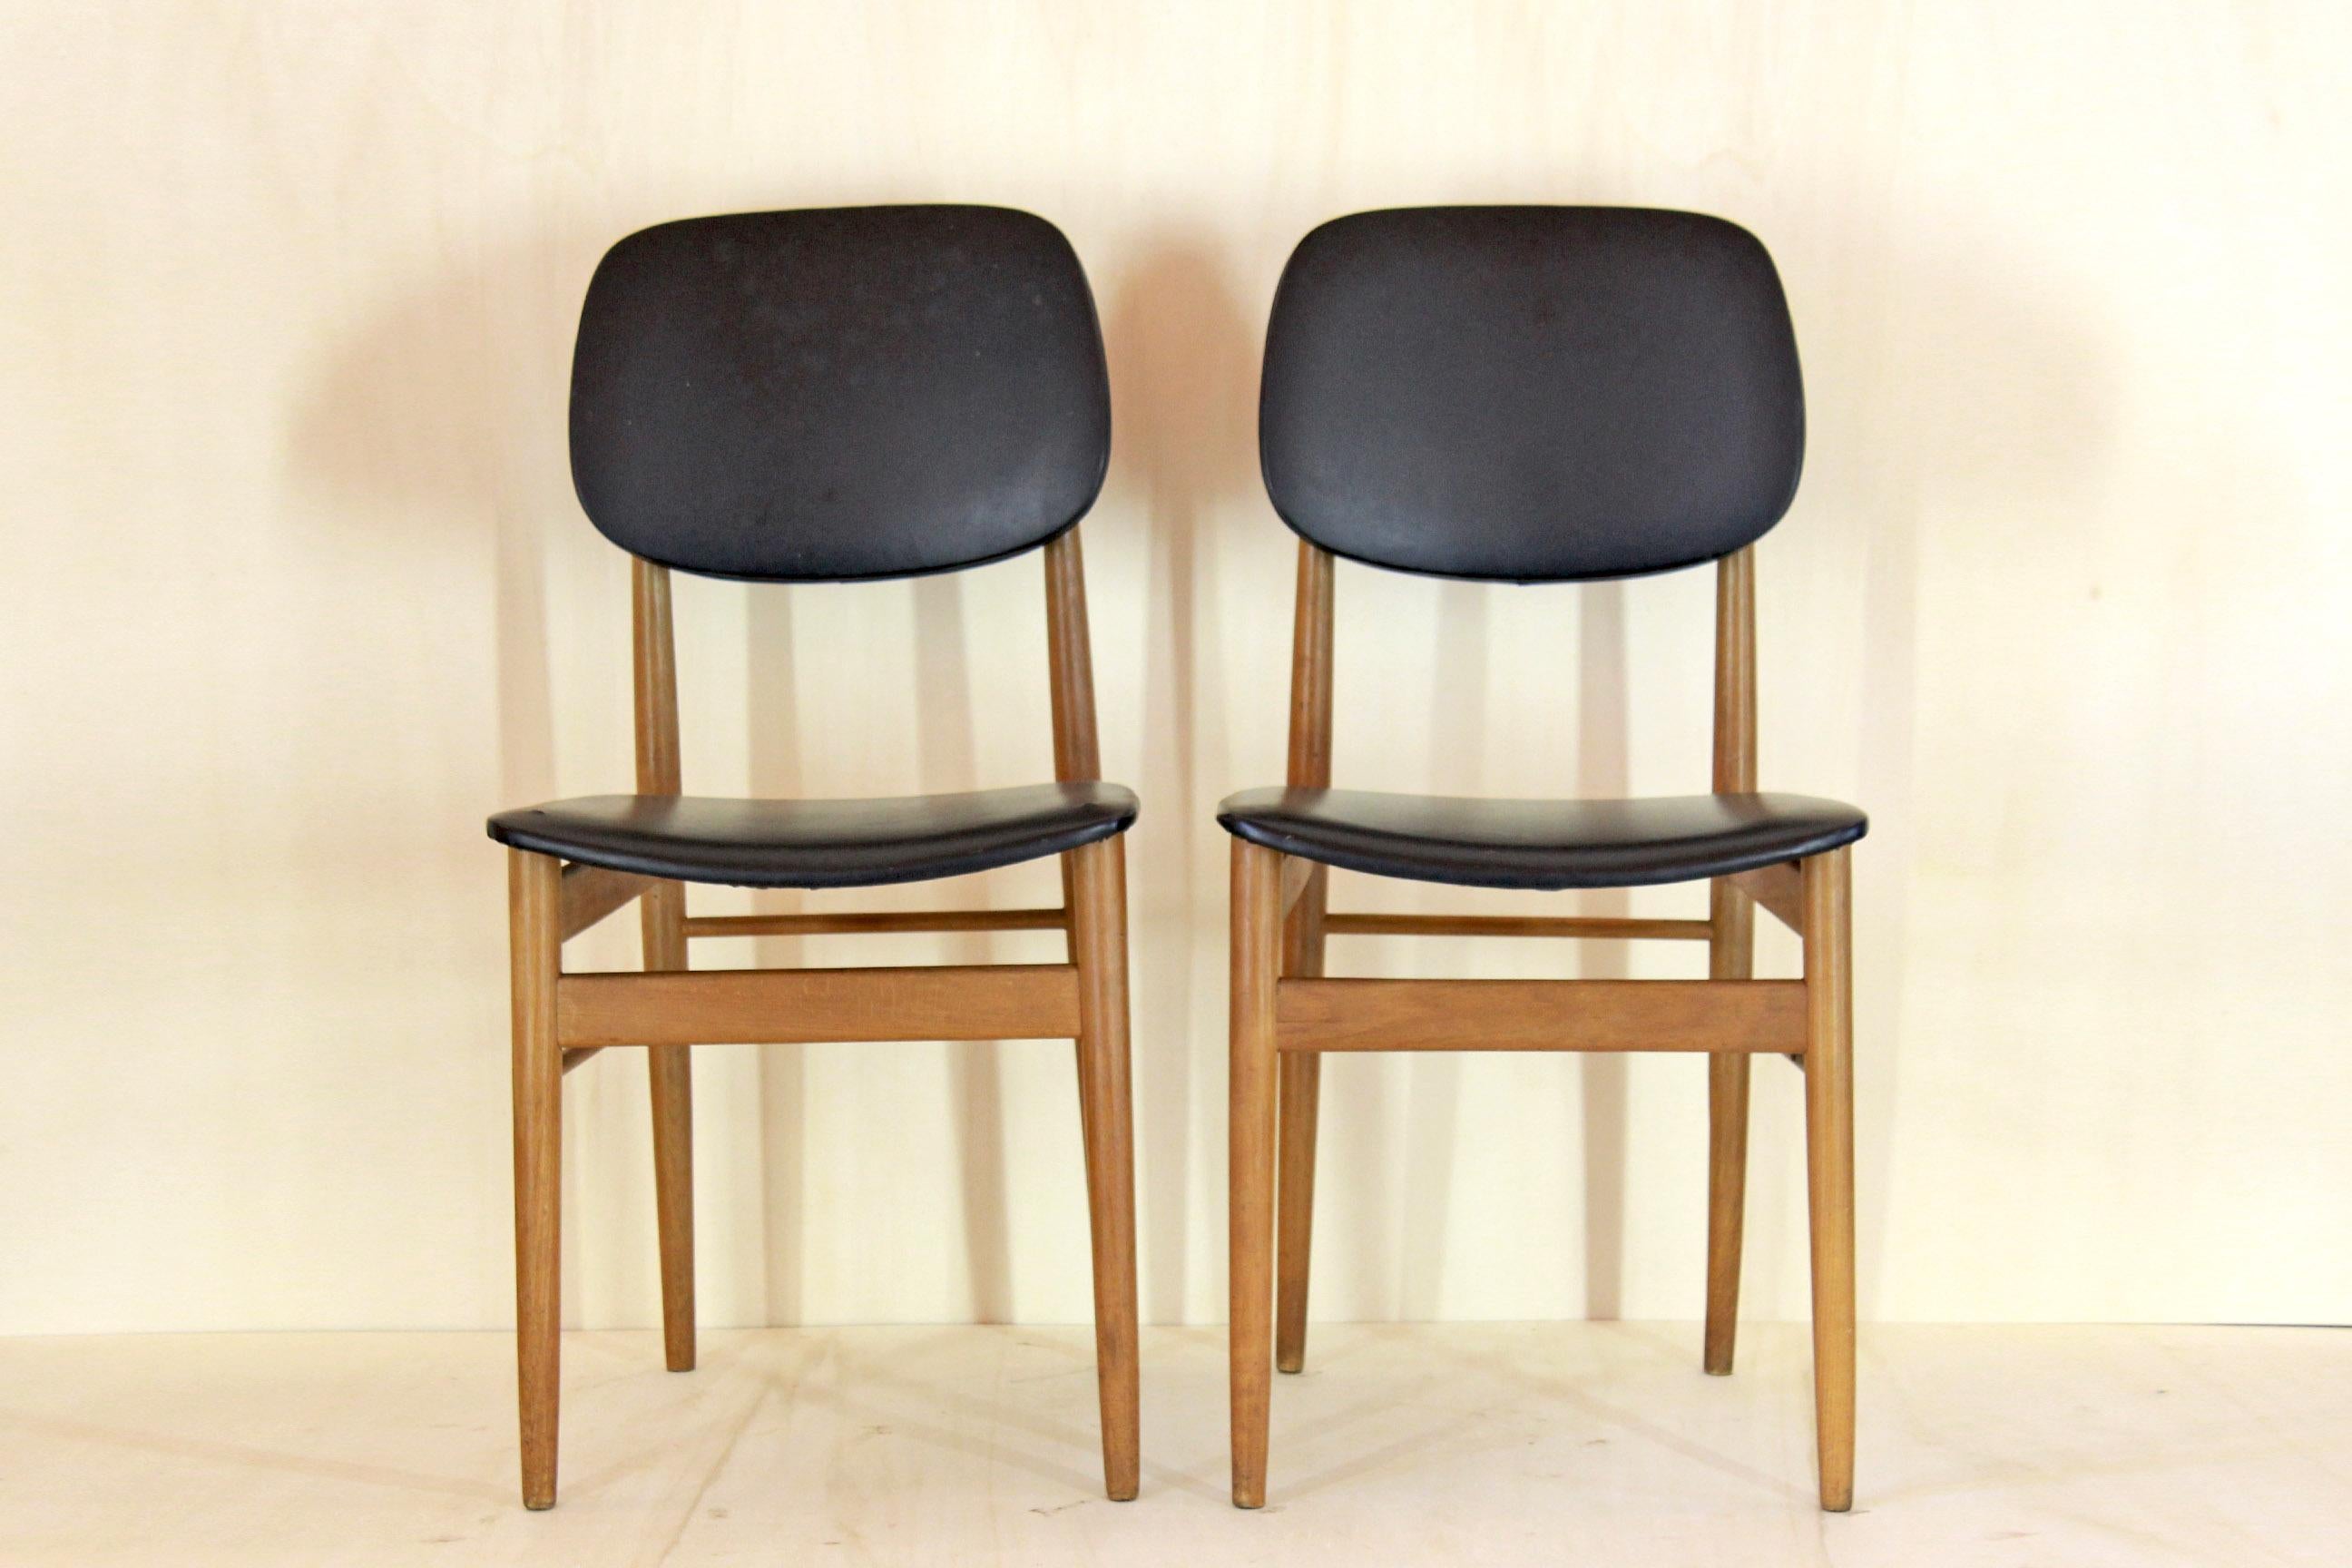 Two dining chairs designed by 